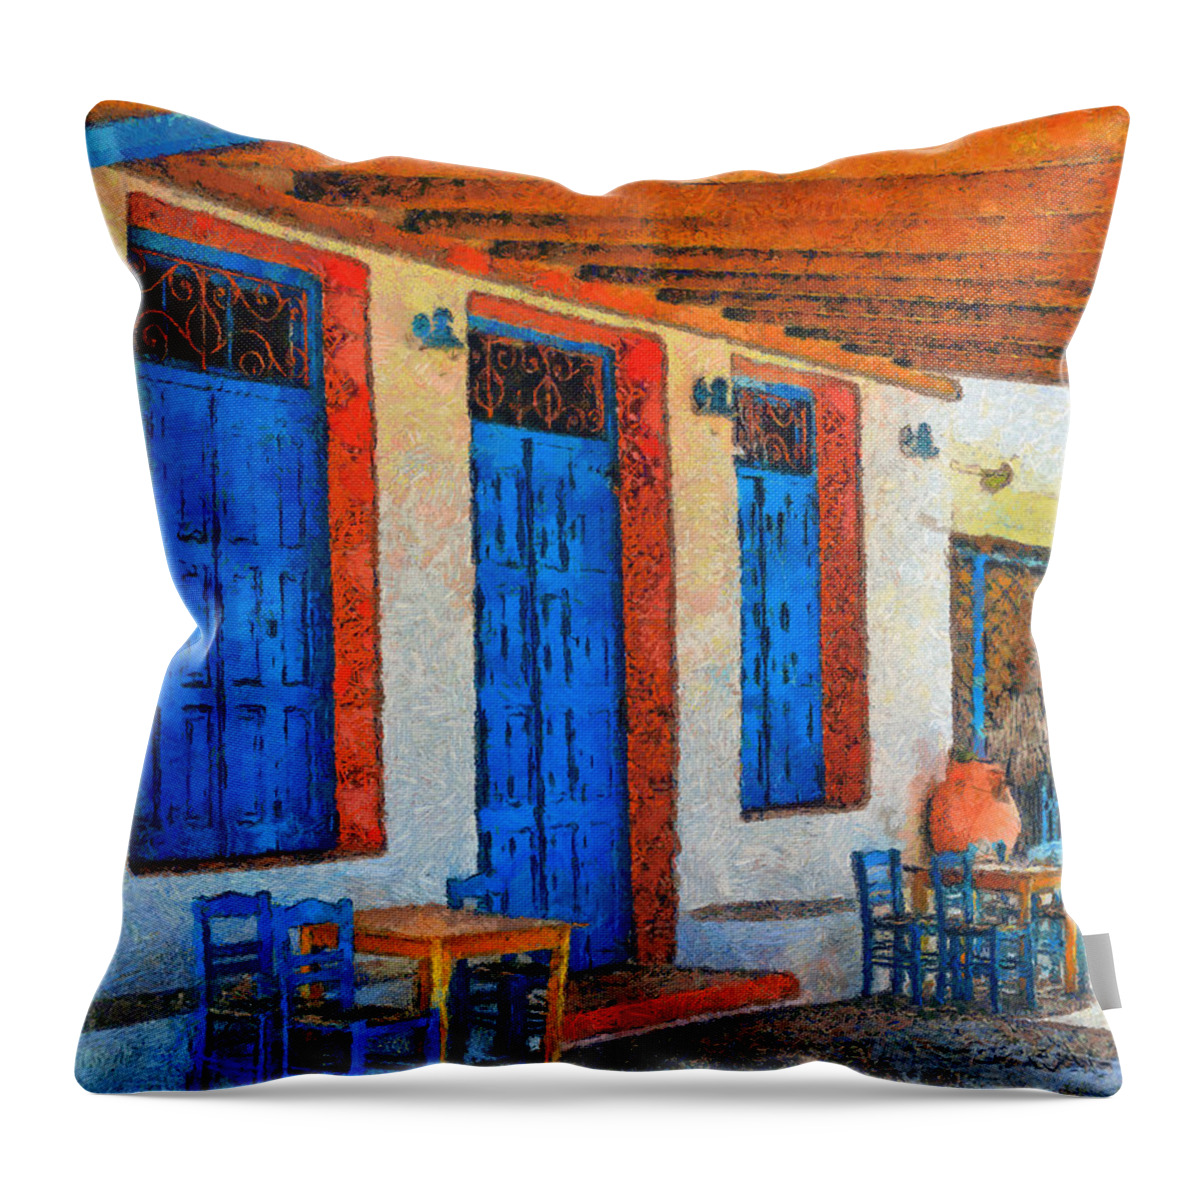 Rossidis Throw Pillow featuring the painting Greek cafe by George Rossidis